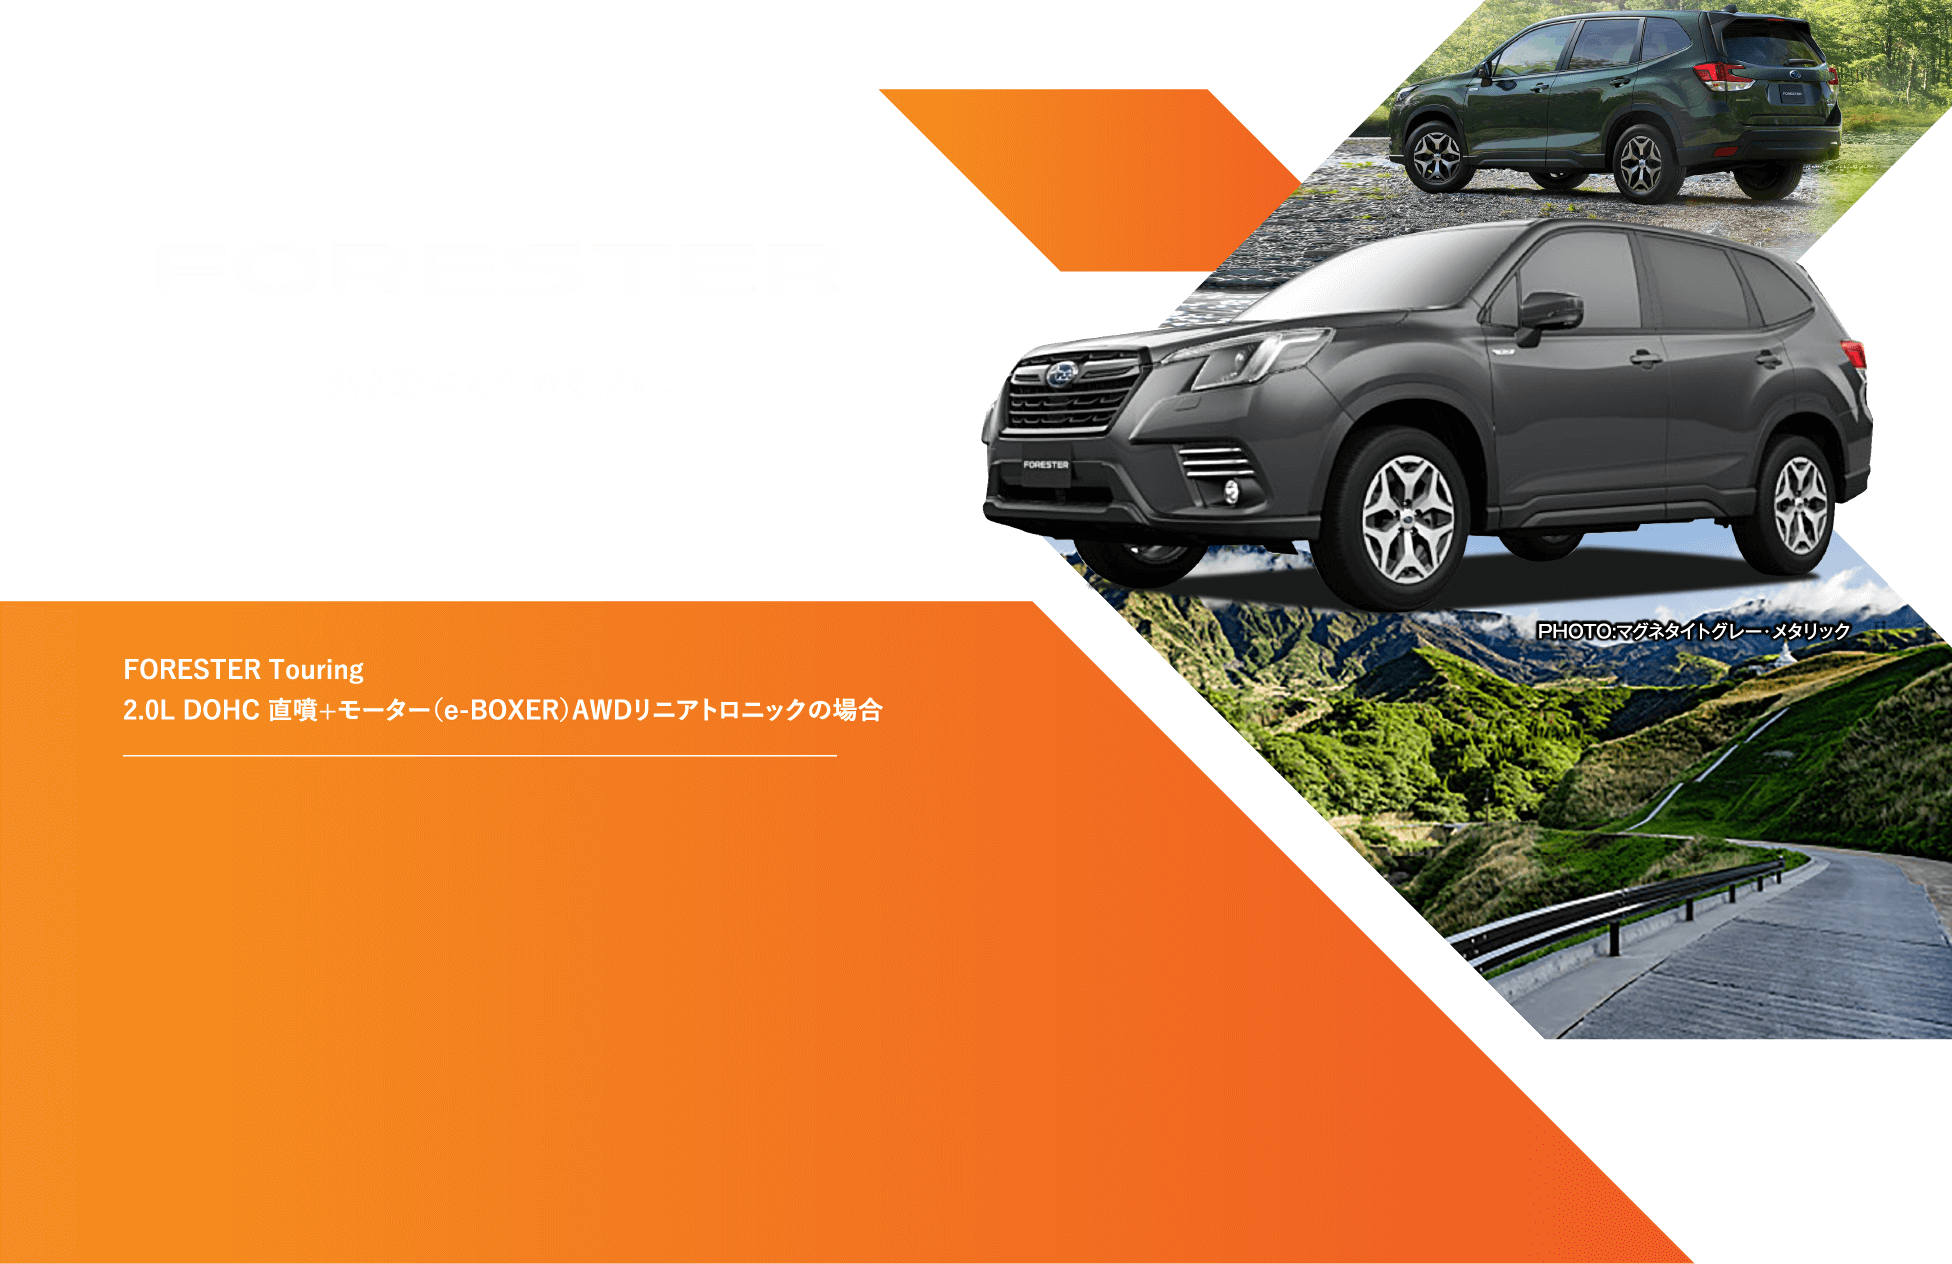 FORESTER 自然と遊ぶ人生のそばに。FORESTER Touring 2.0L DOHC 直噴+モーター（e-BOXER）AWDリニアトロニックの場合